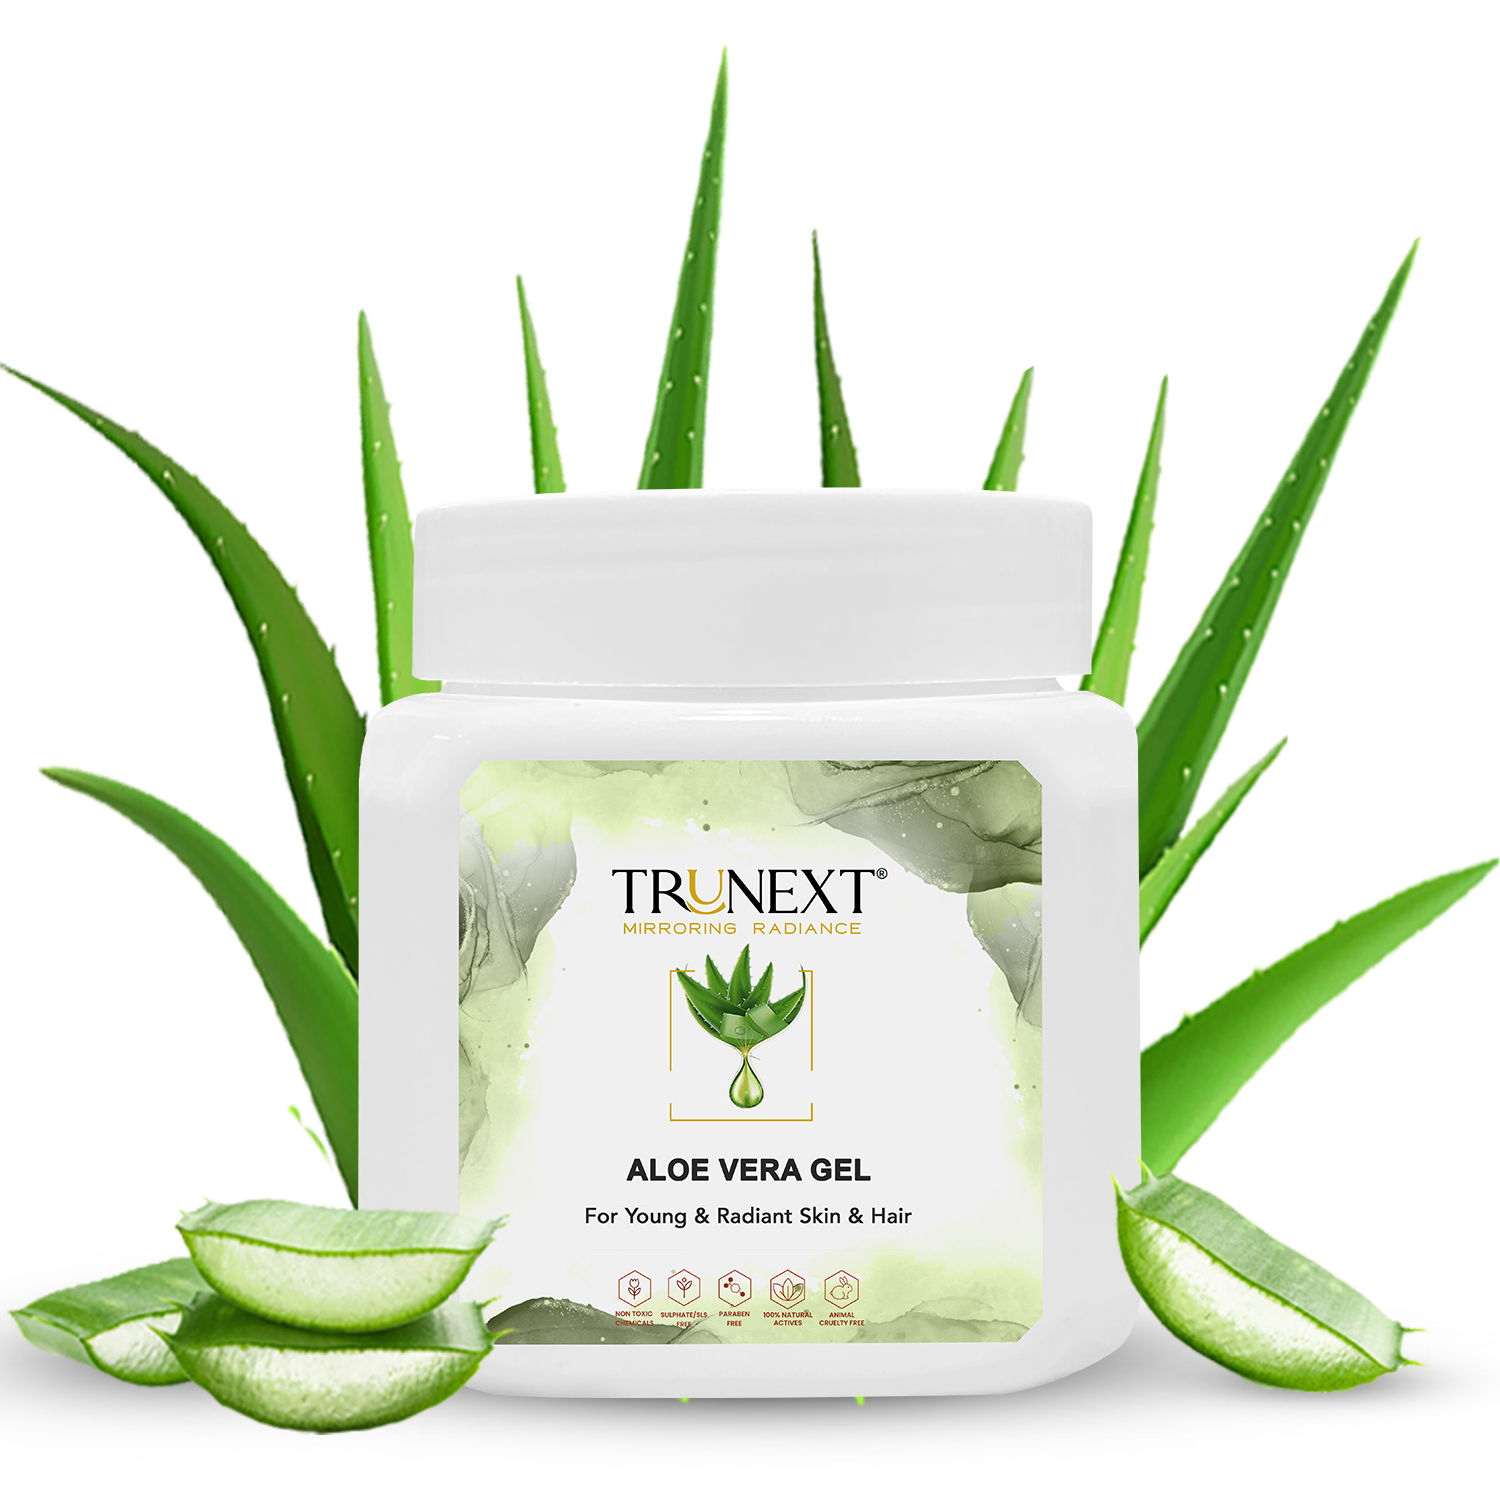 TRUNEXT Aloe Vera Gel for Young & Radiant Skin & Hair, (200 ml)